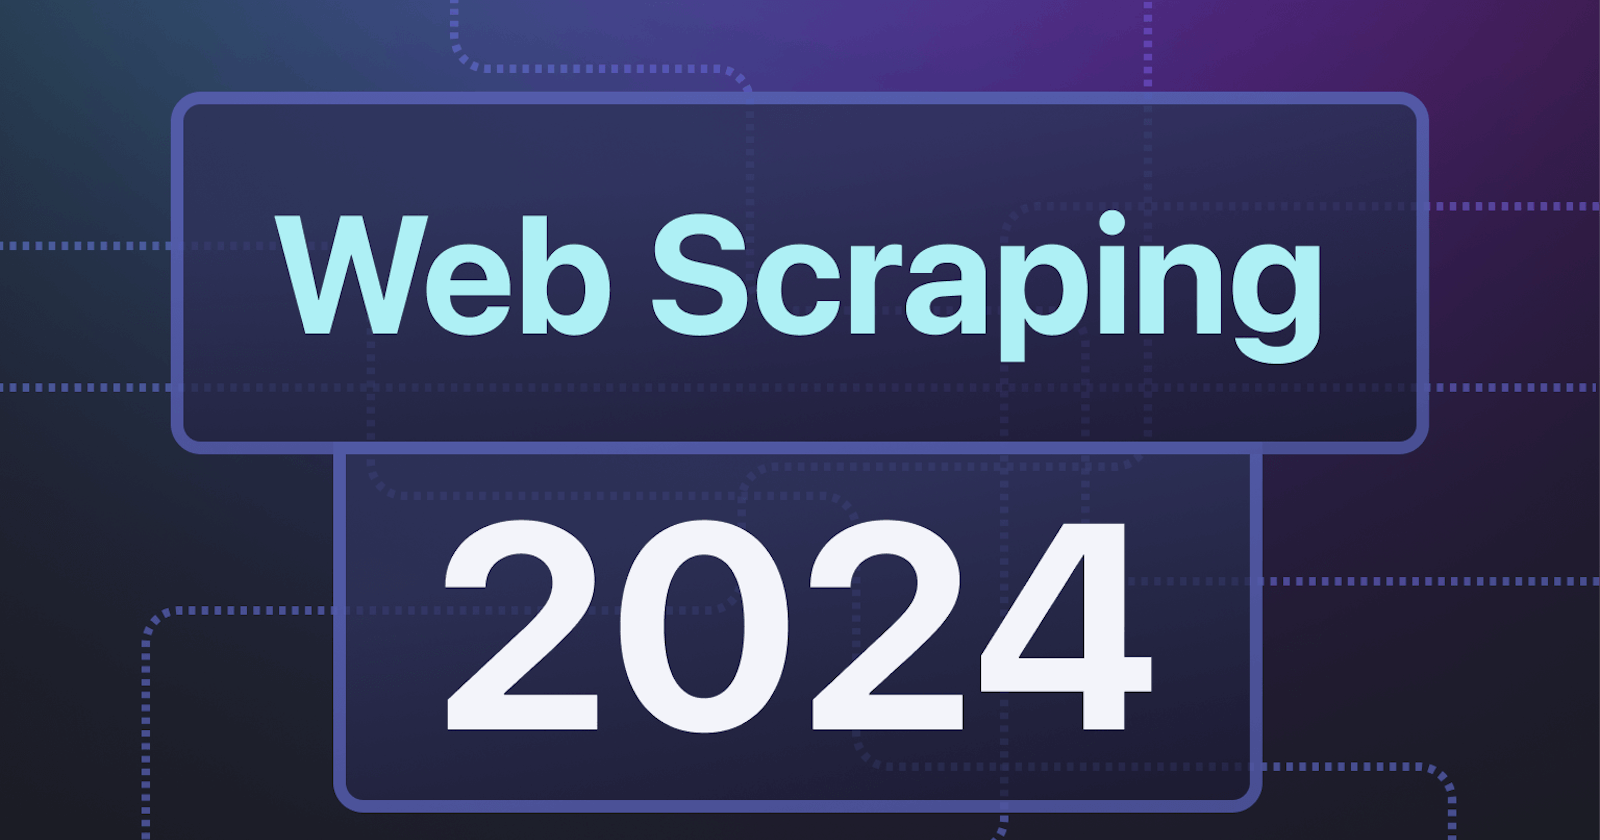 Web scraping in 2024: breakthroughs and challenges ahead